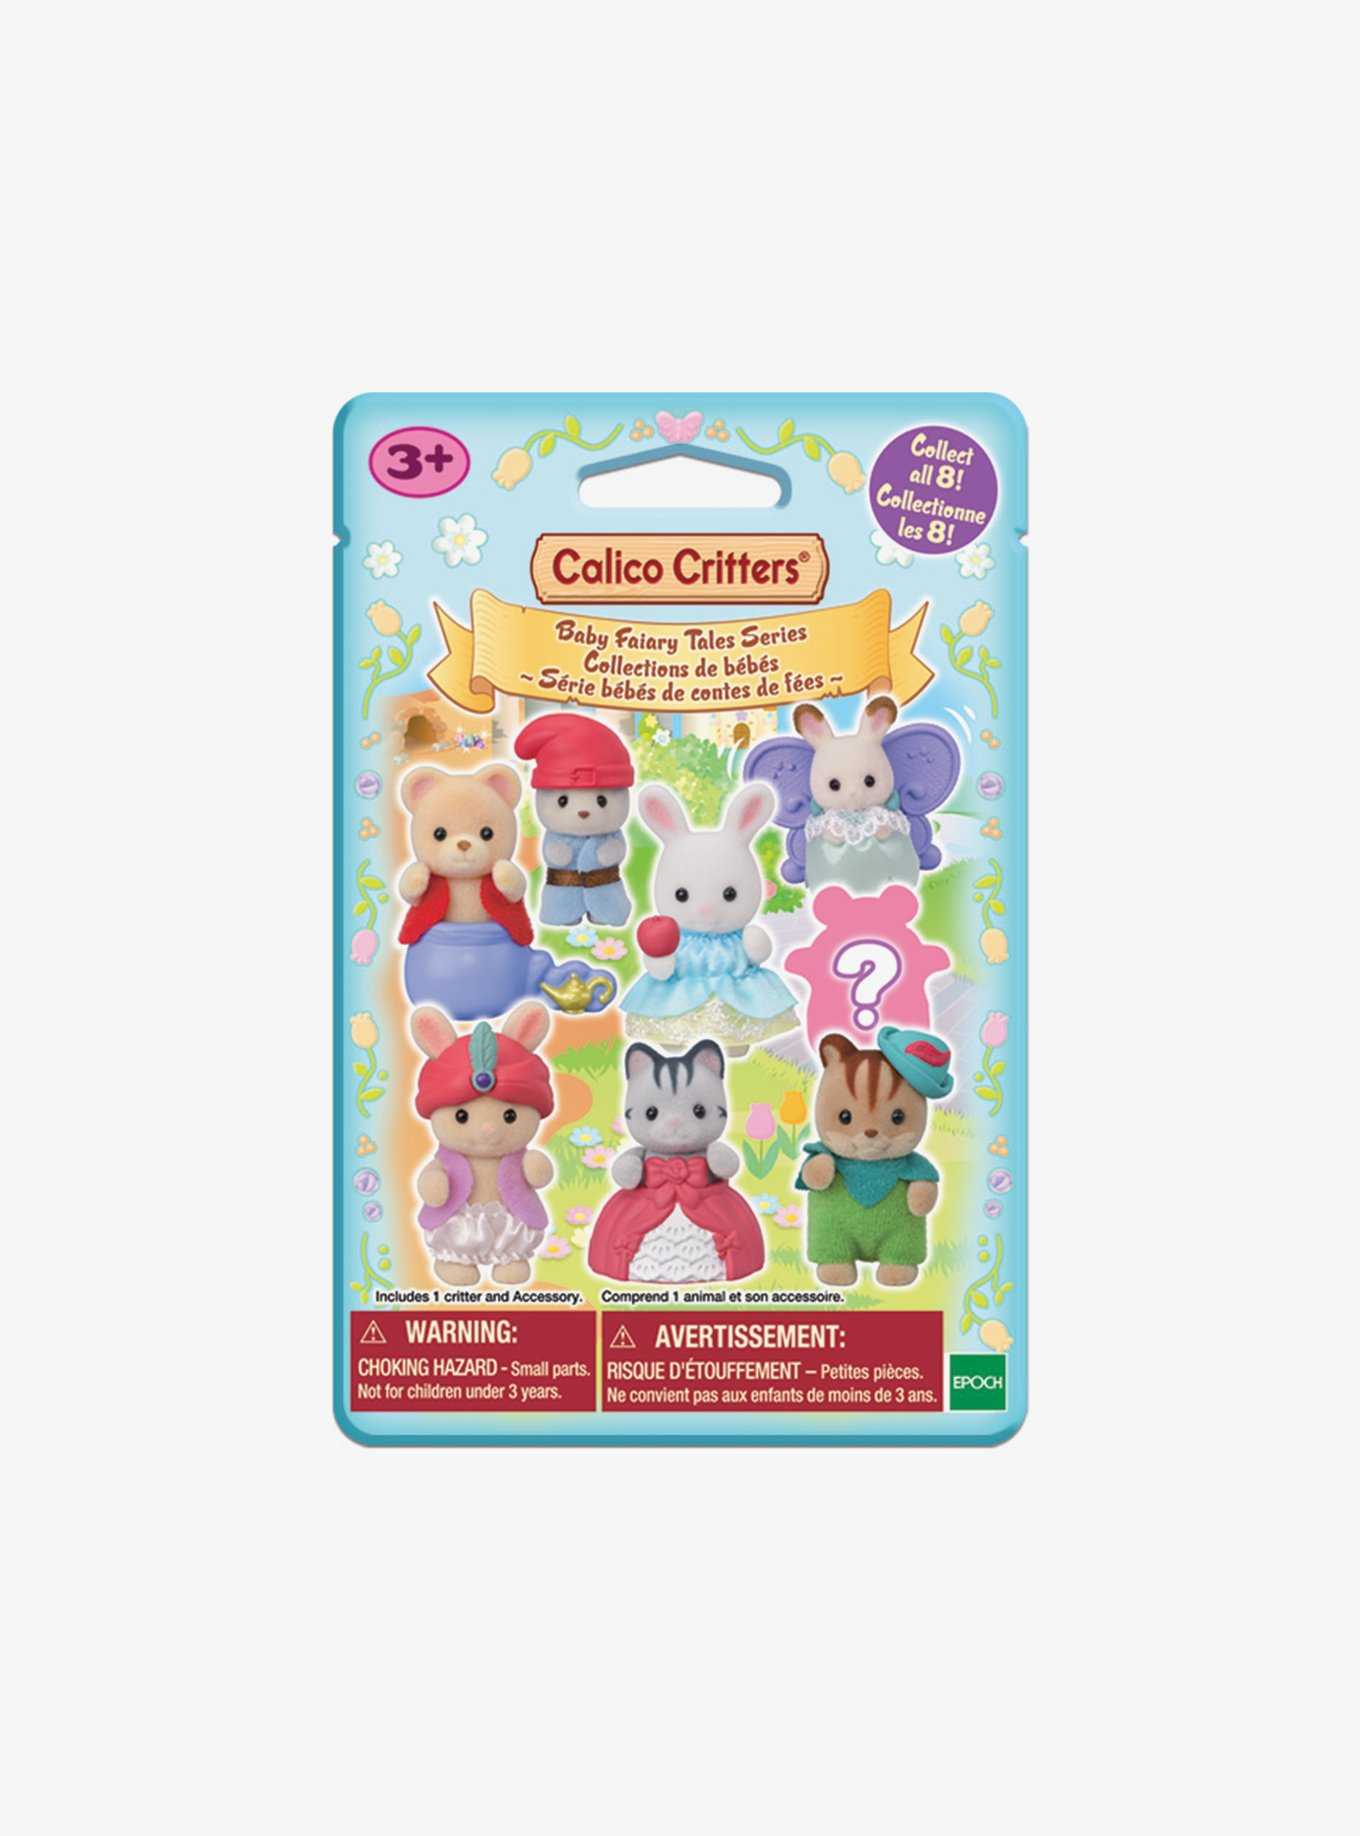 Epoch Calico Critters Blind Bags Baby Band Series, 4 Pack